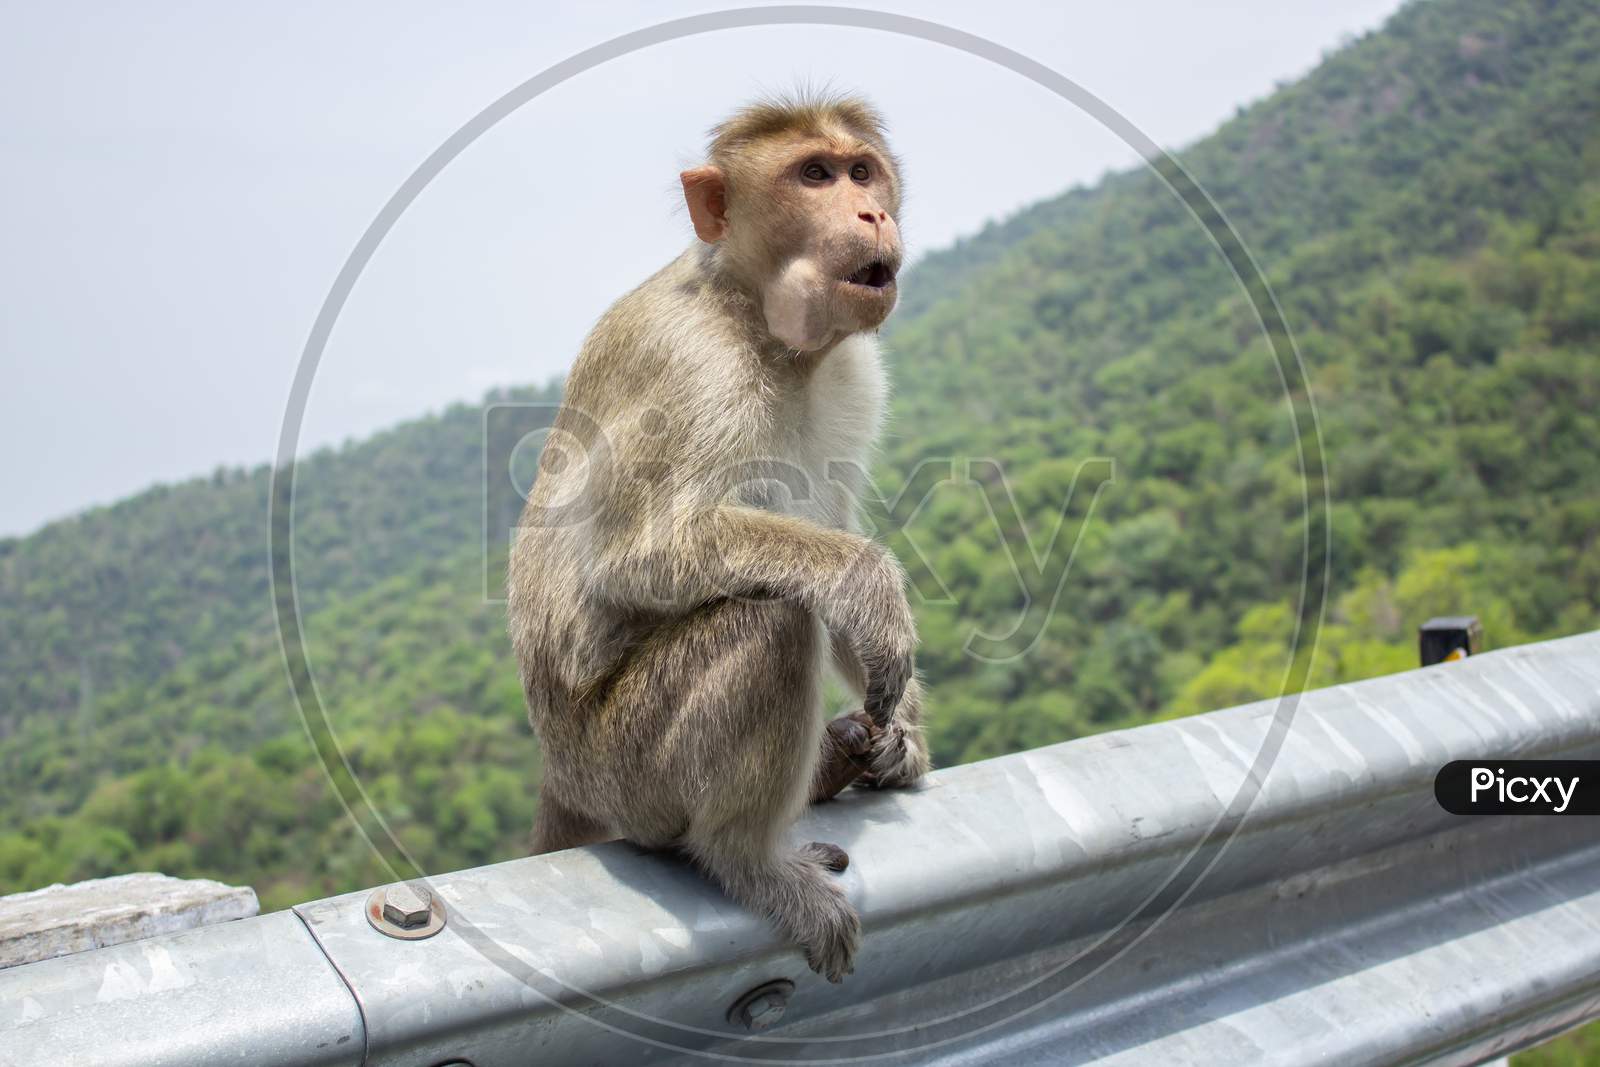 Portrait Of An Indian Monkey Sitting On A Metal Fence On A Mountain